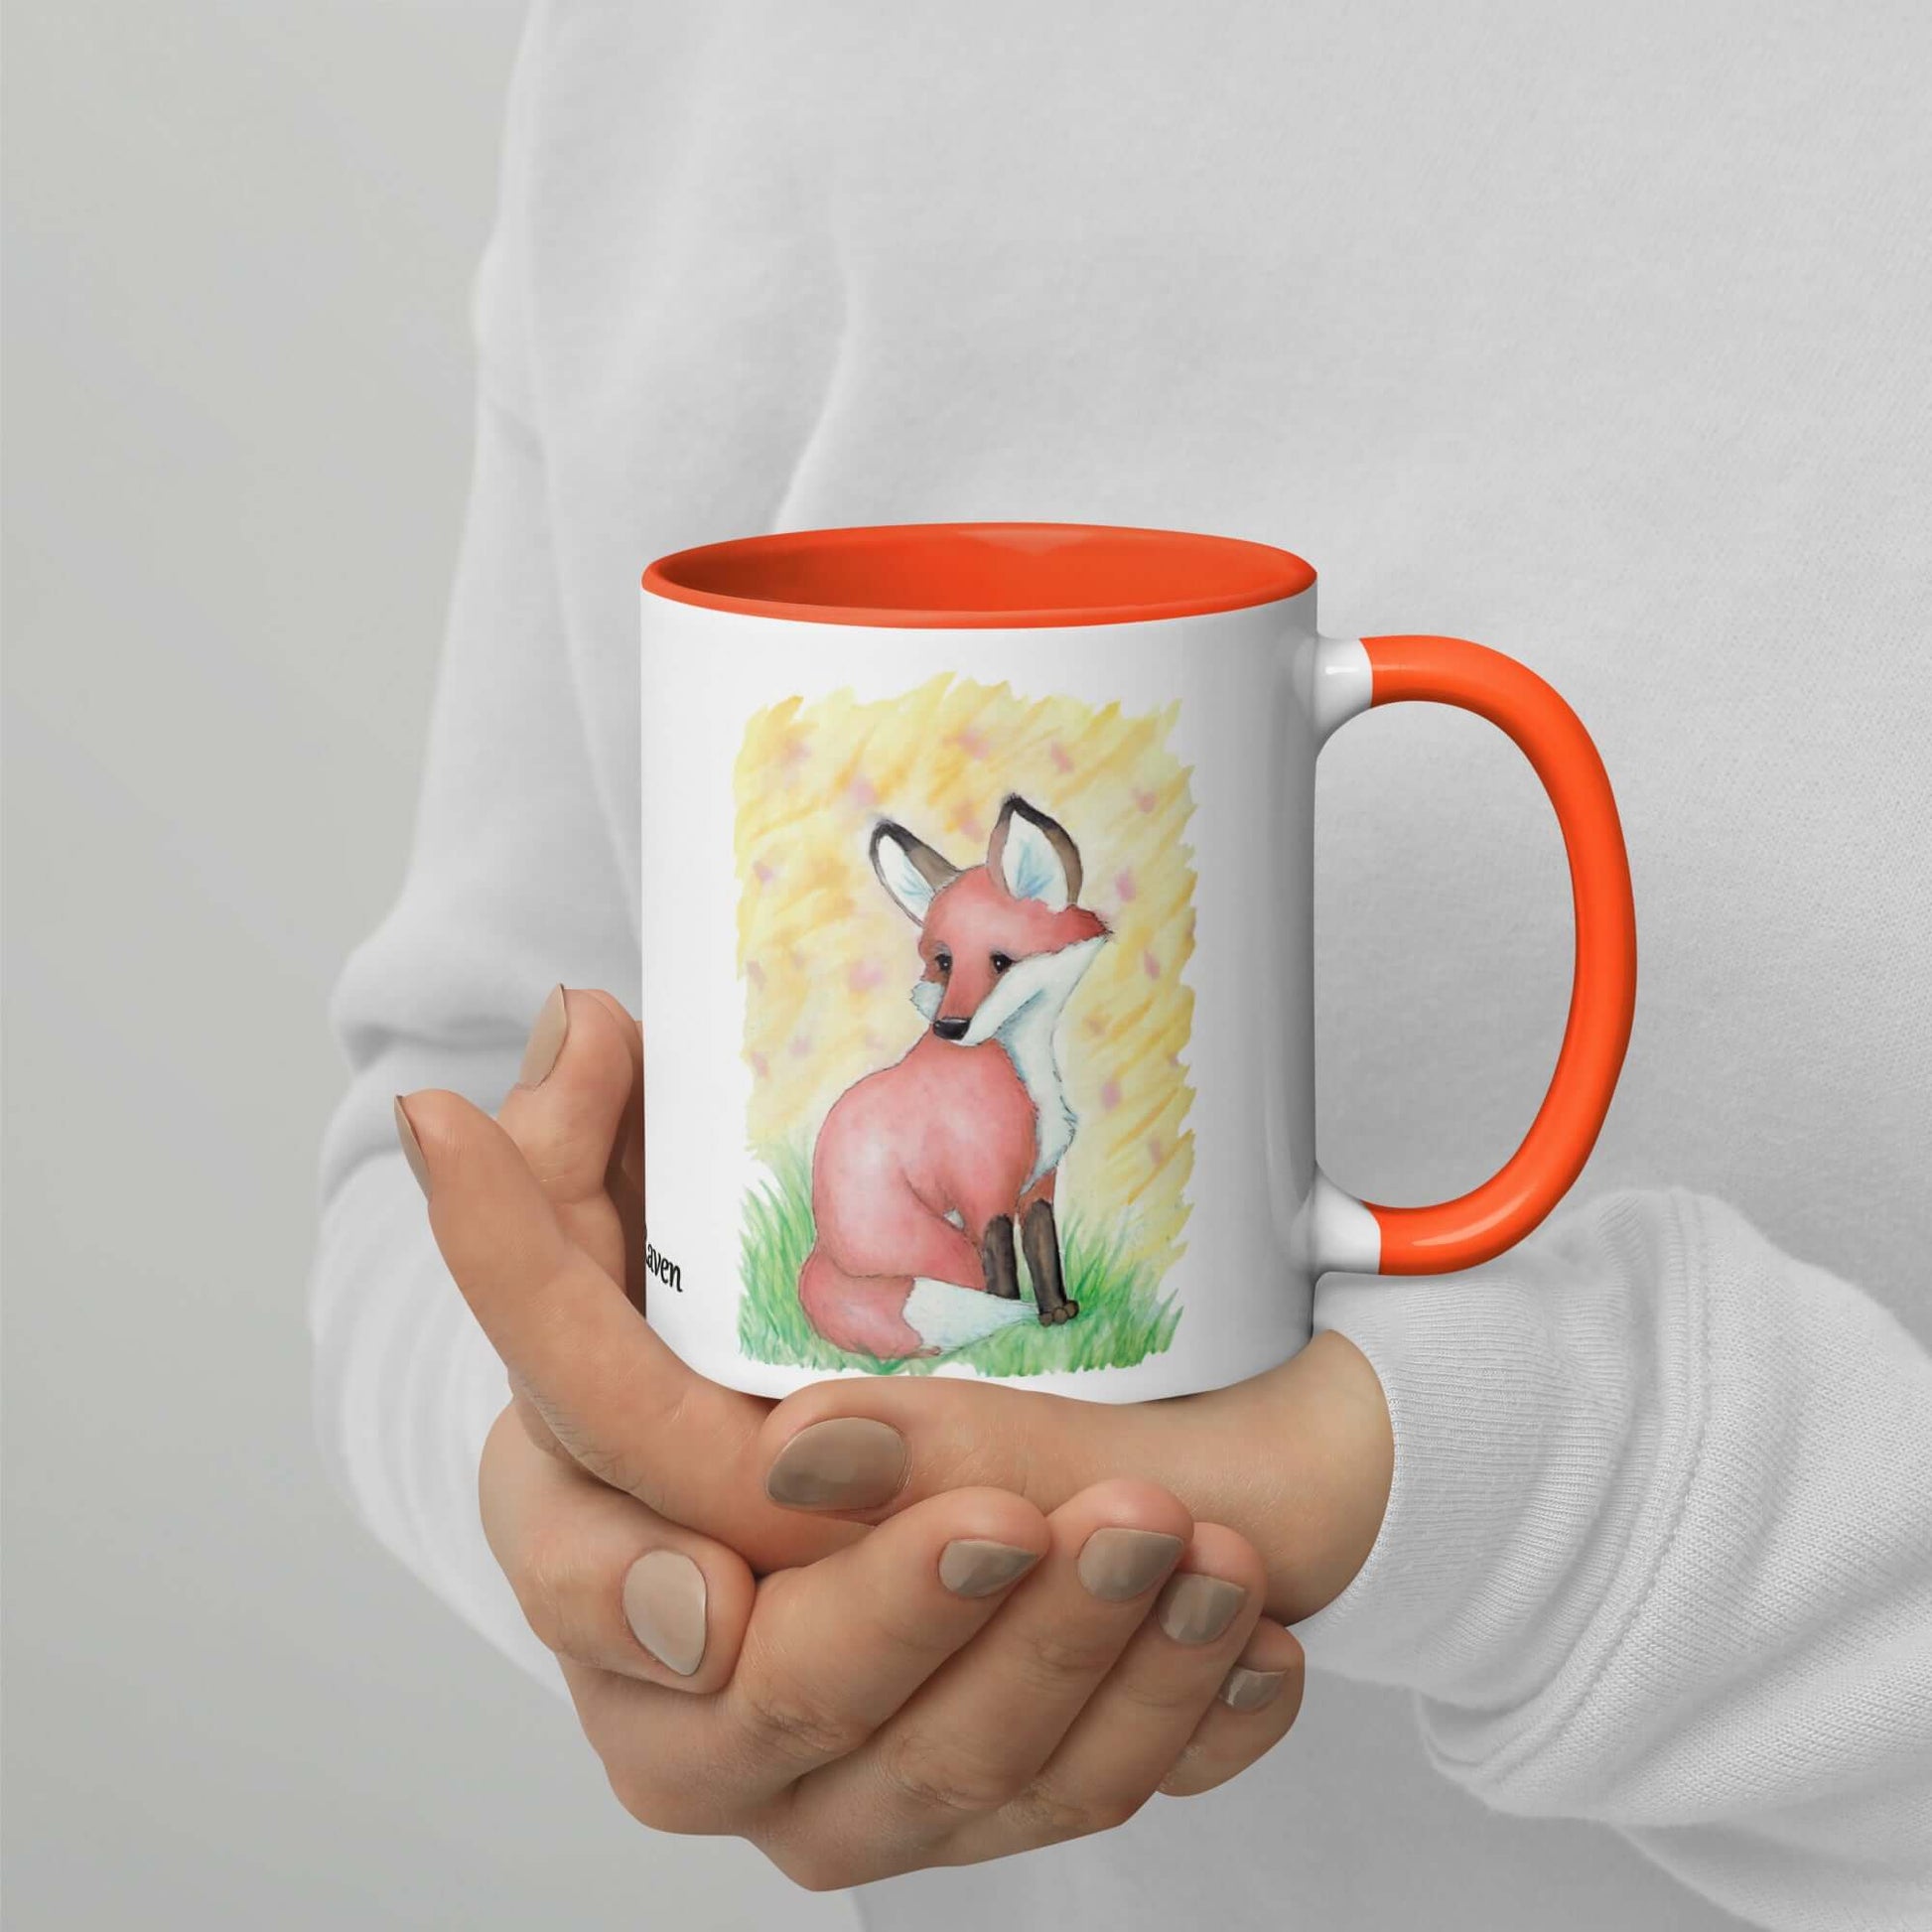 11 oz white ceramic mug with orange inside and handle. Features double-sided image of original watercolor painting of a fox in the grass against a yellow backdrop. Shown in model's hands.